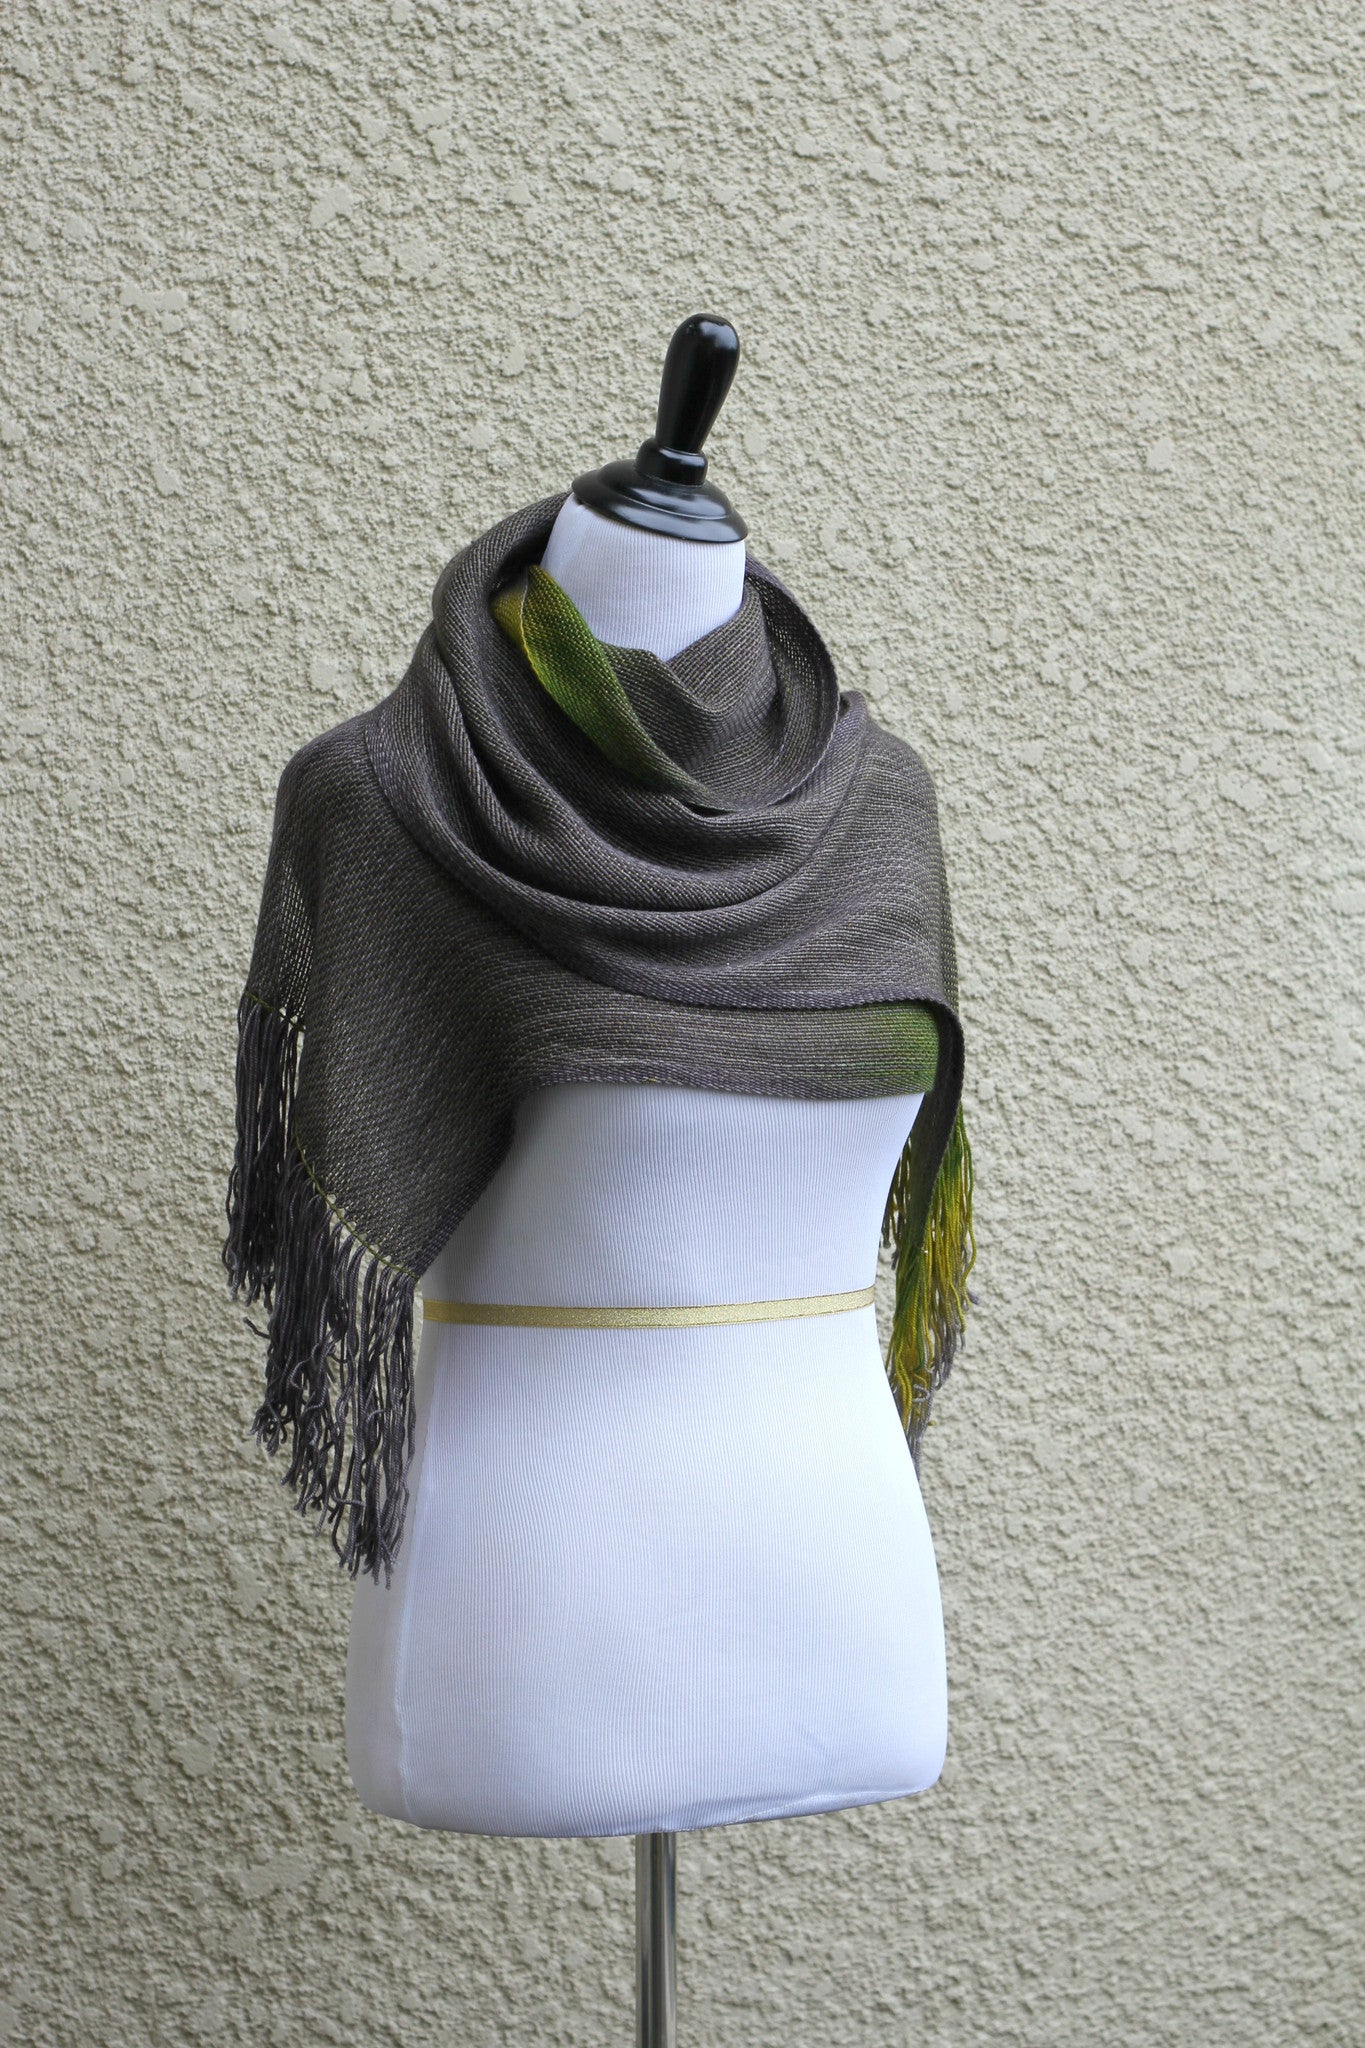 Woven grey and green wrap